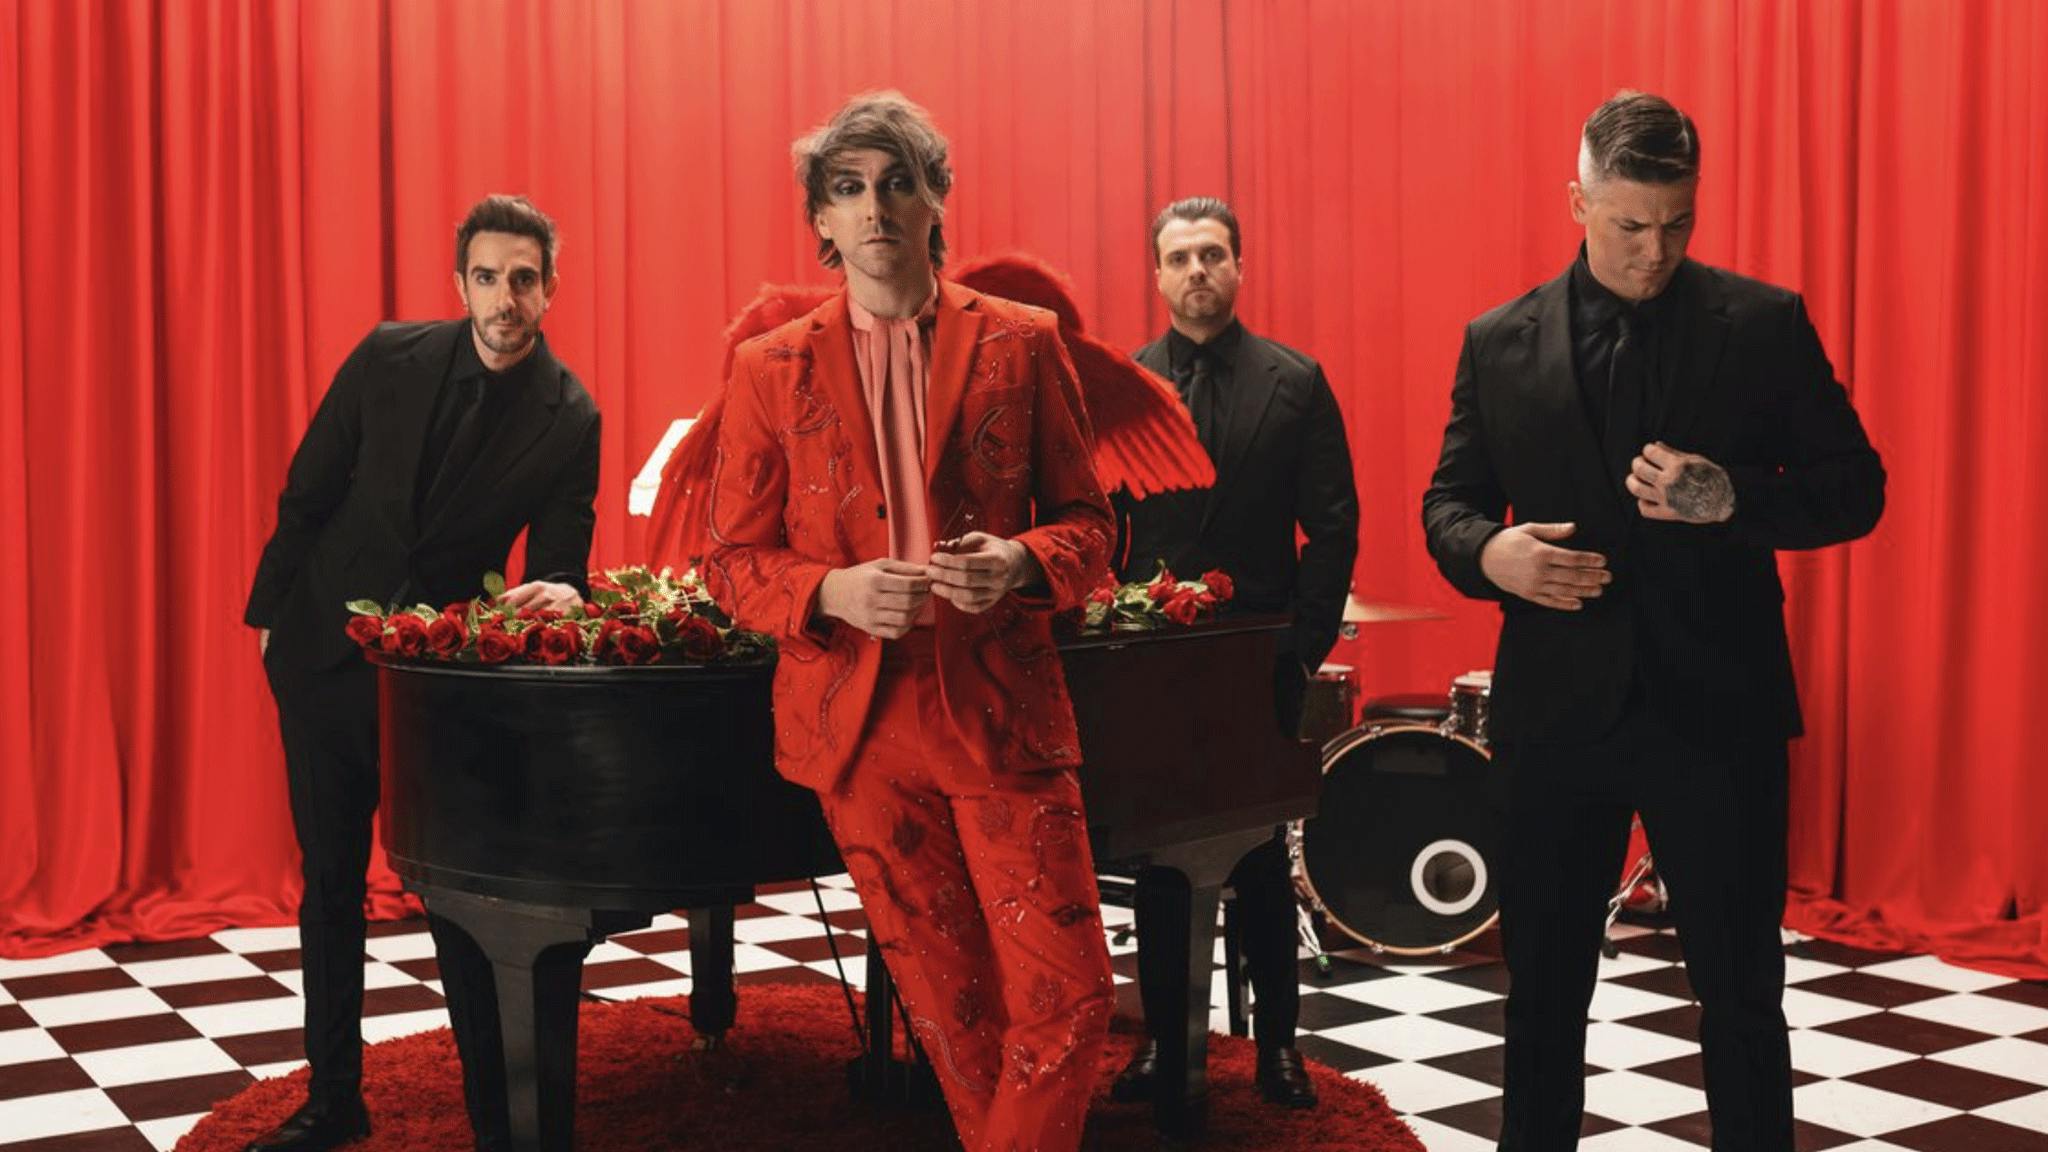 Watch the video for All Time Low’s new Valentine’s Day single Modern Love